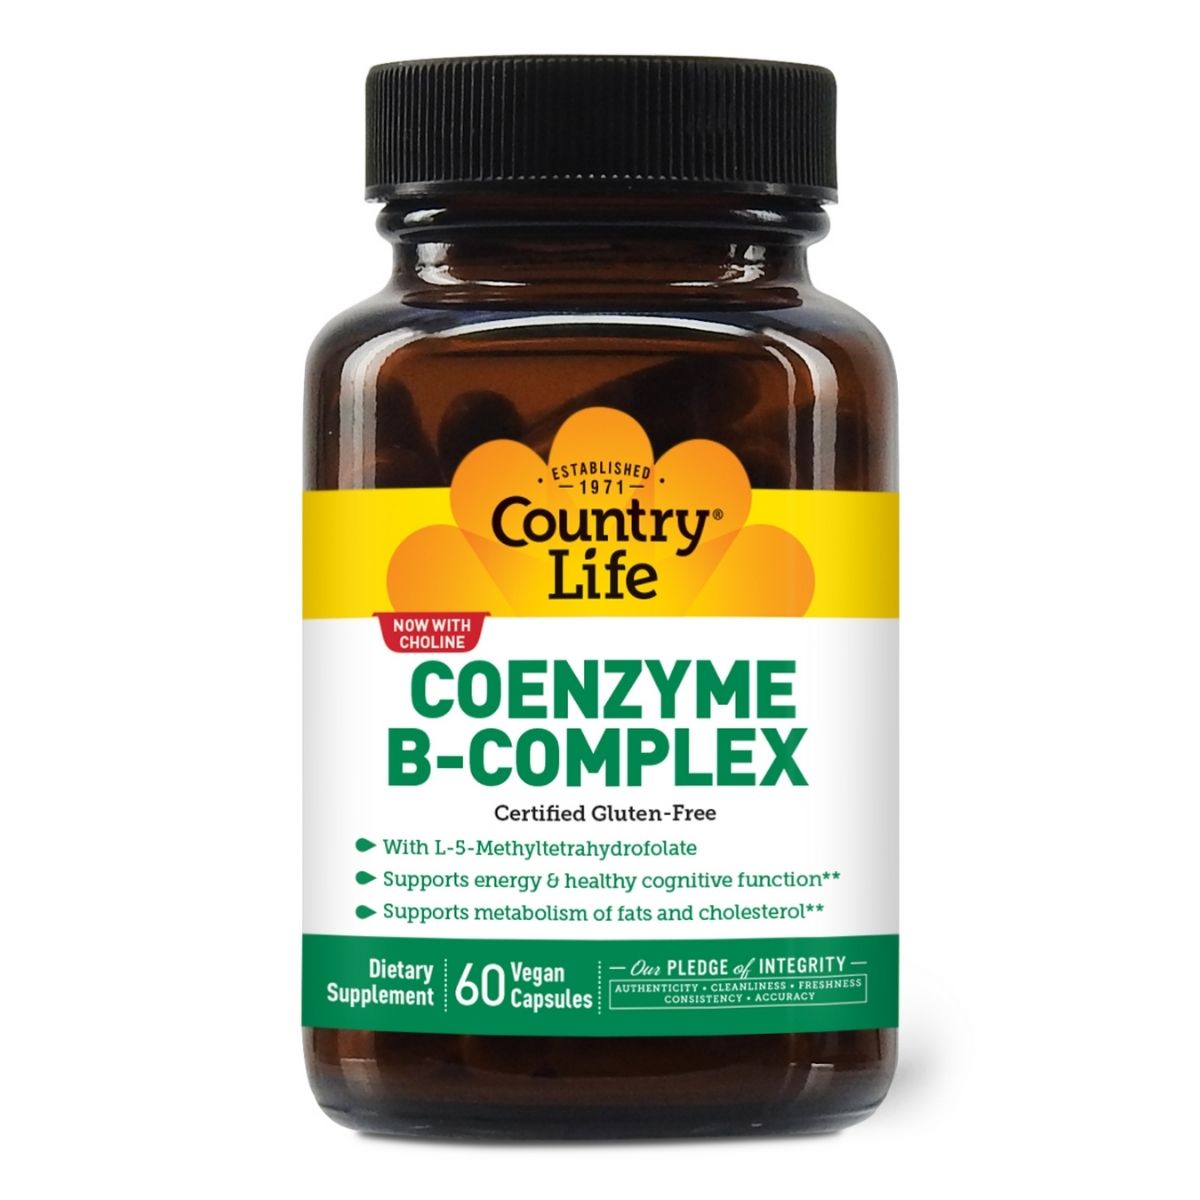 Coenzyme B-Complex on sale!